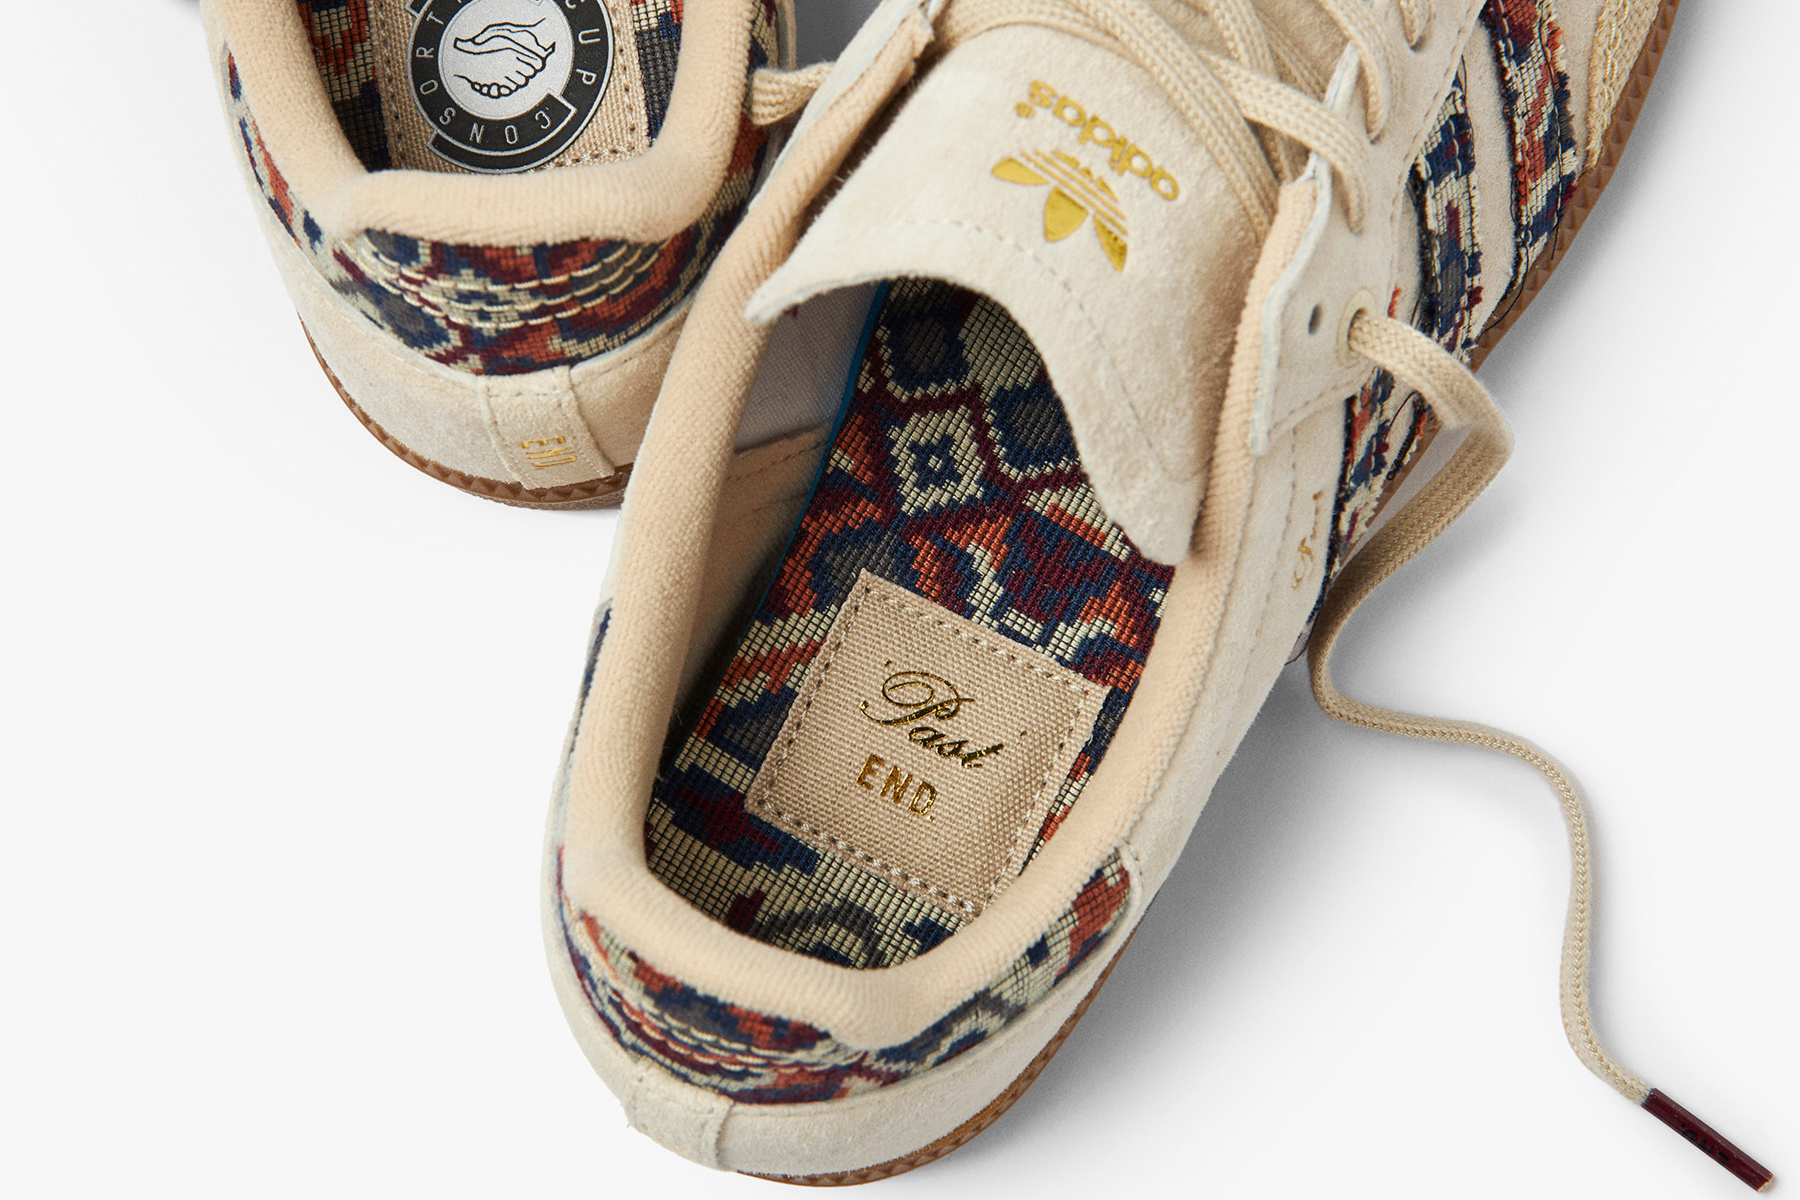 END.'s adidas Samba sneaker is inspired by traditional weaving with tapestry-like materials adorning the epochal three stripes.